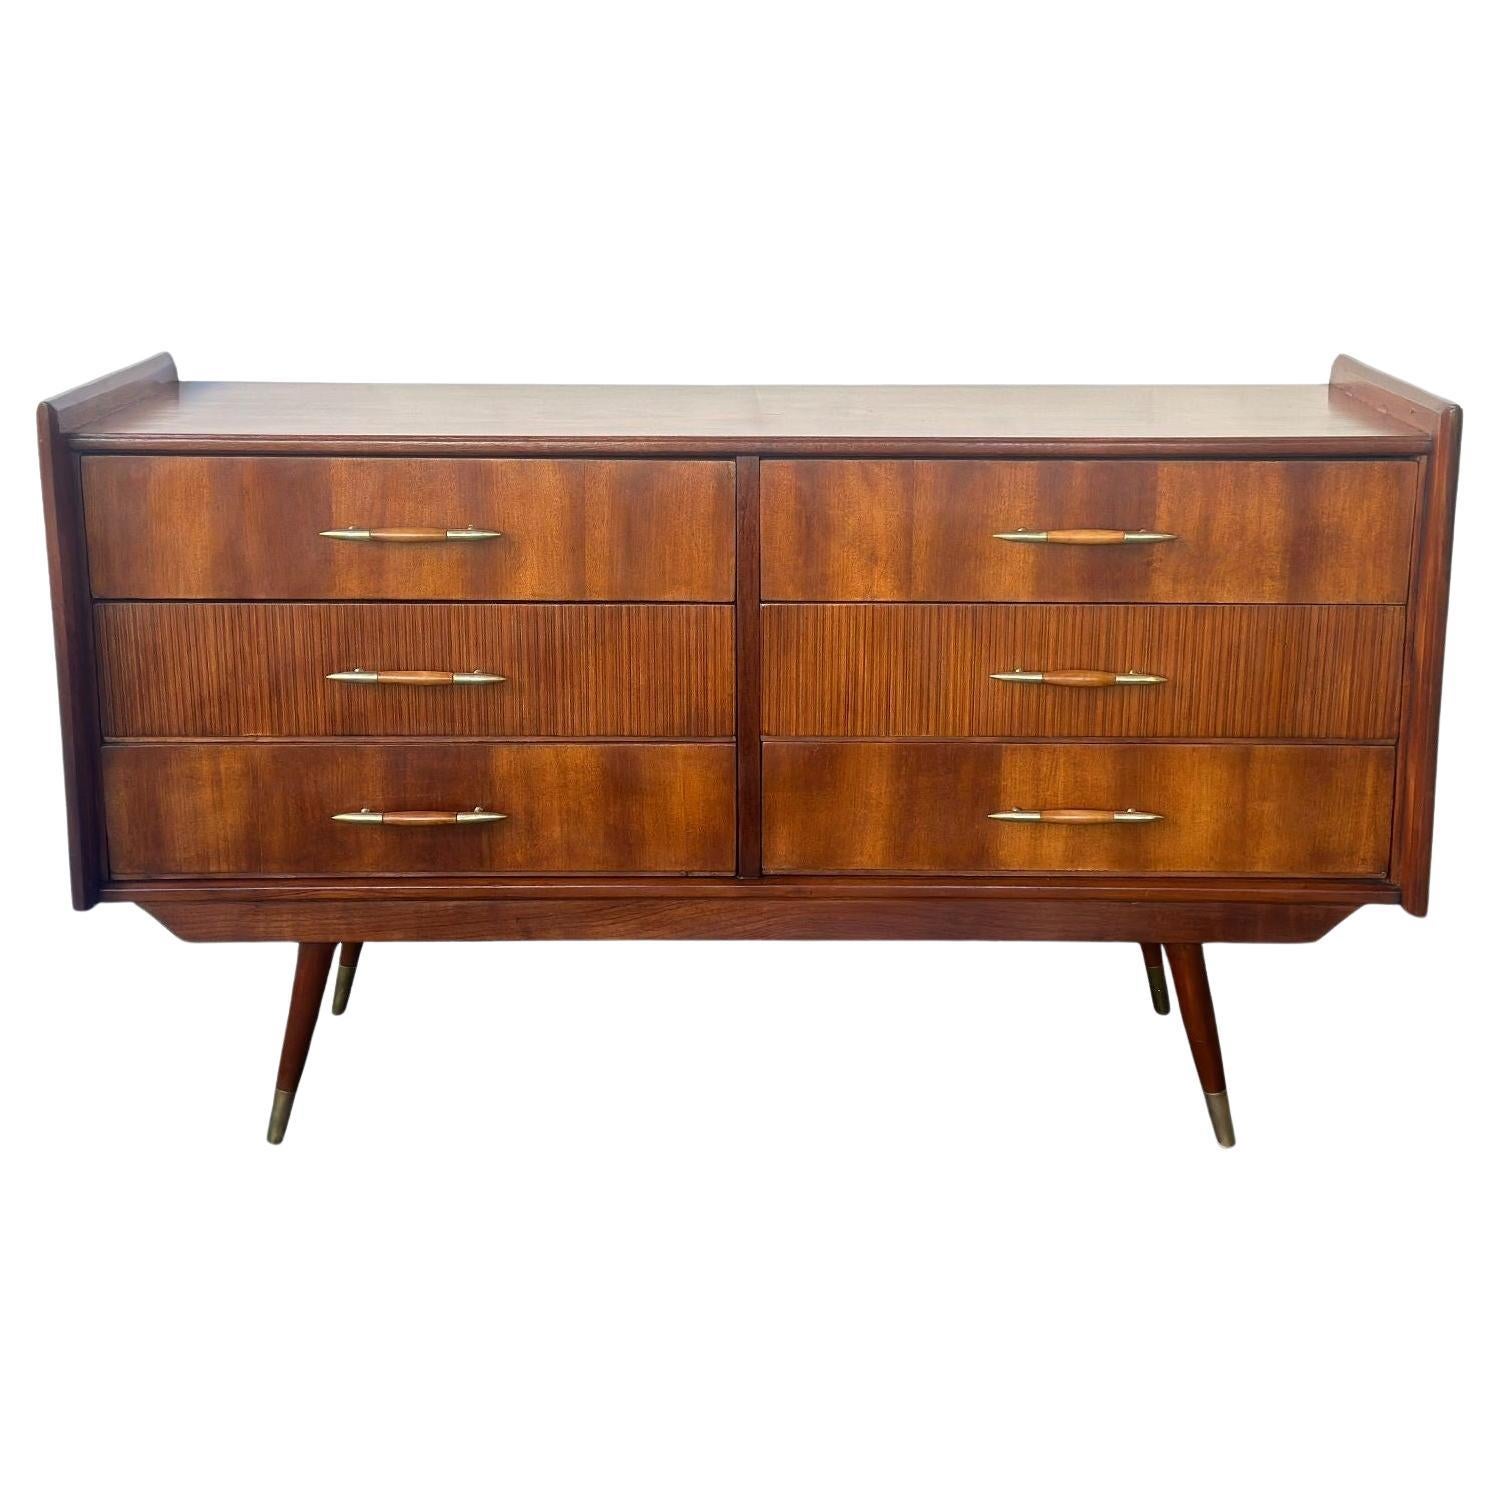 Vintage Italian Mid-Century Dresser with Brass Accents, c. 1950's For Sale